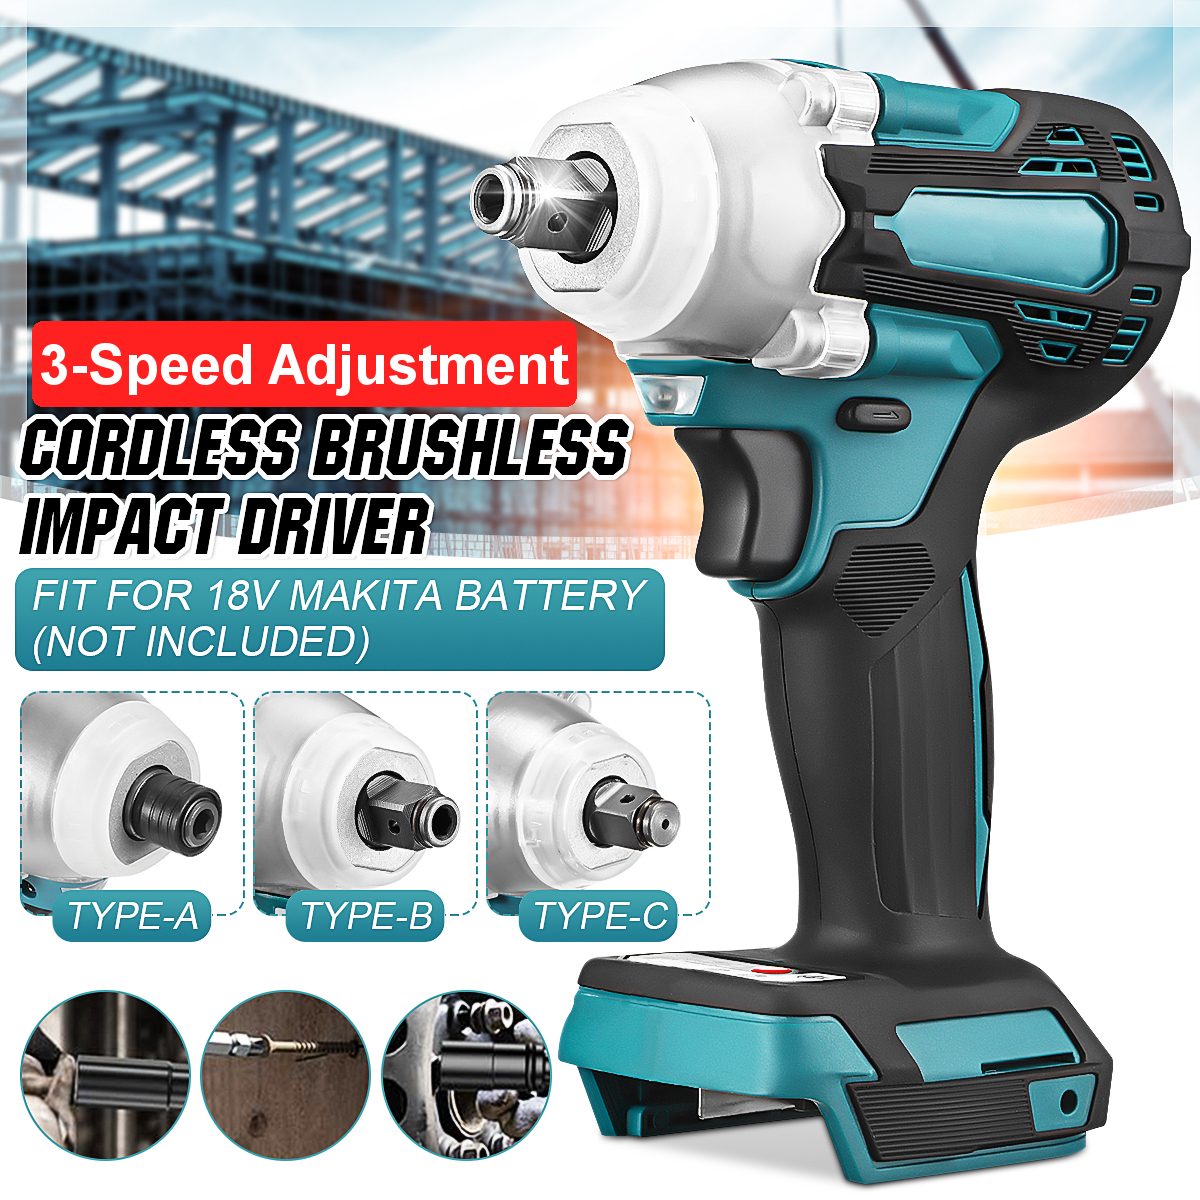 DTW300-2-in1-18V-800Nm-Li-Ion-Brushless-Cordless-12quot-Electric-Wrench-14quotScrewdriver-Drill-Repl-1854869-1